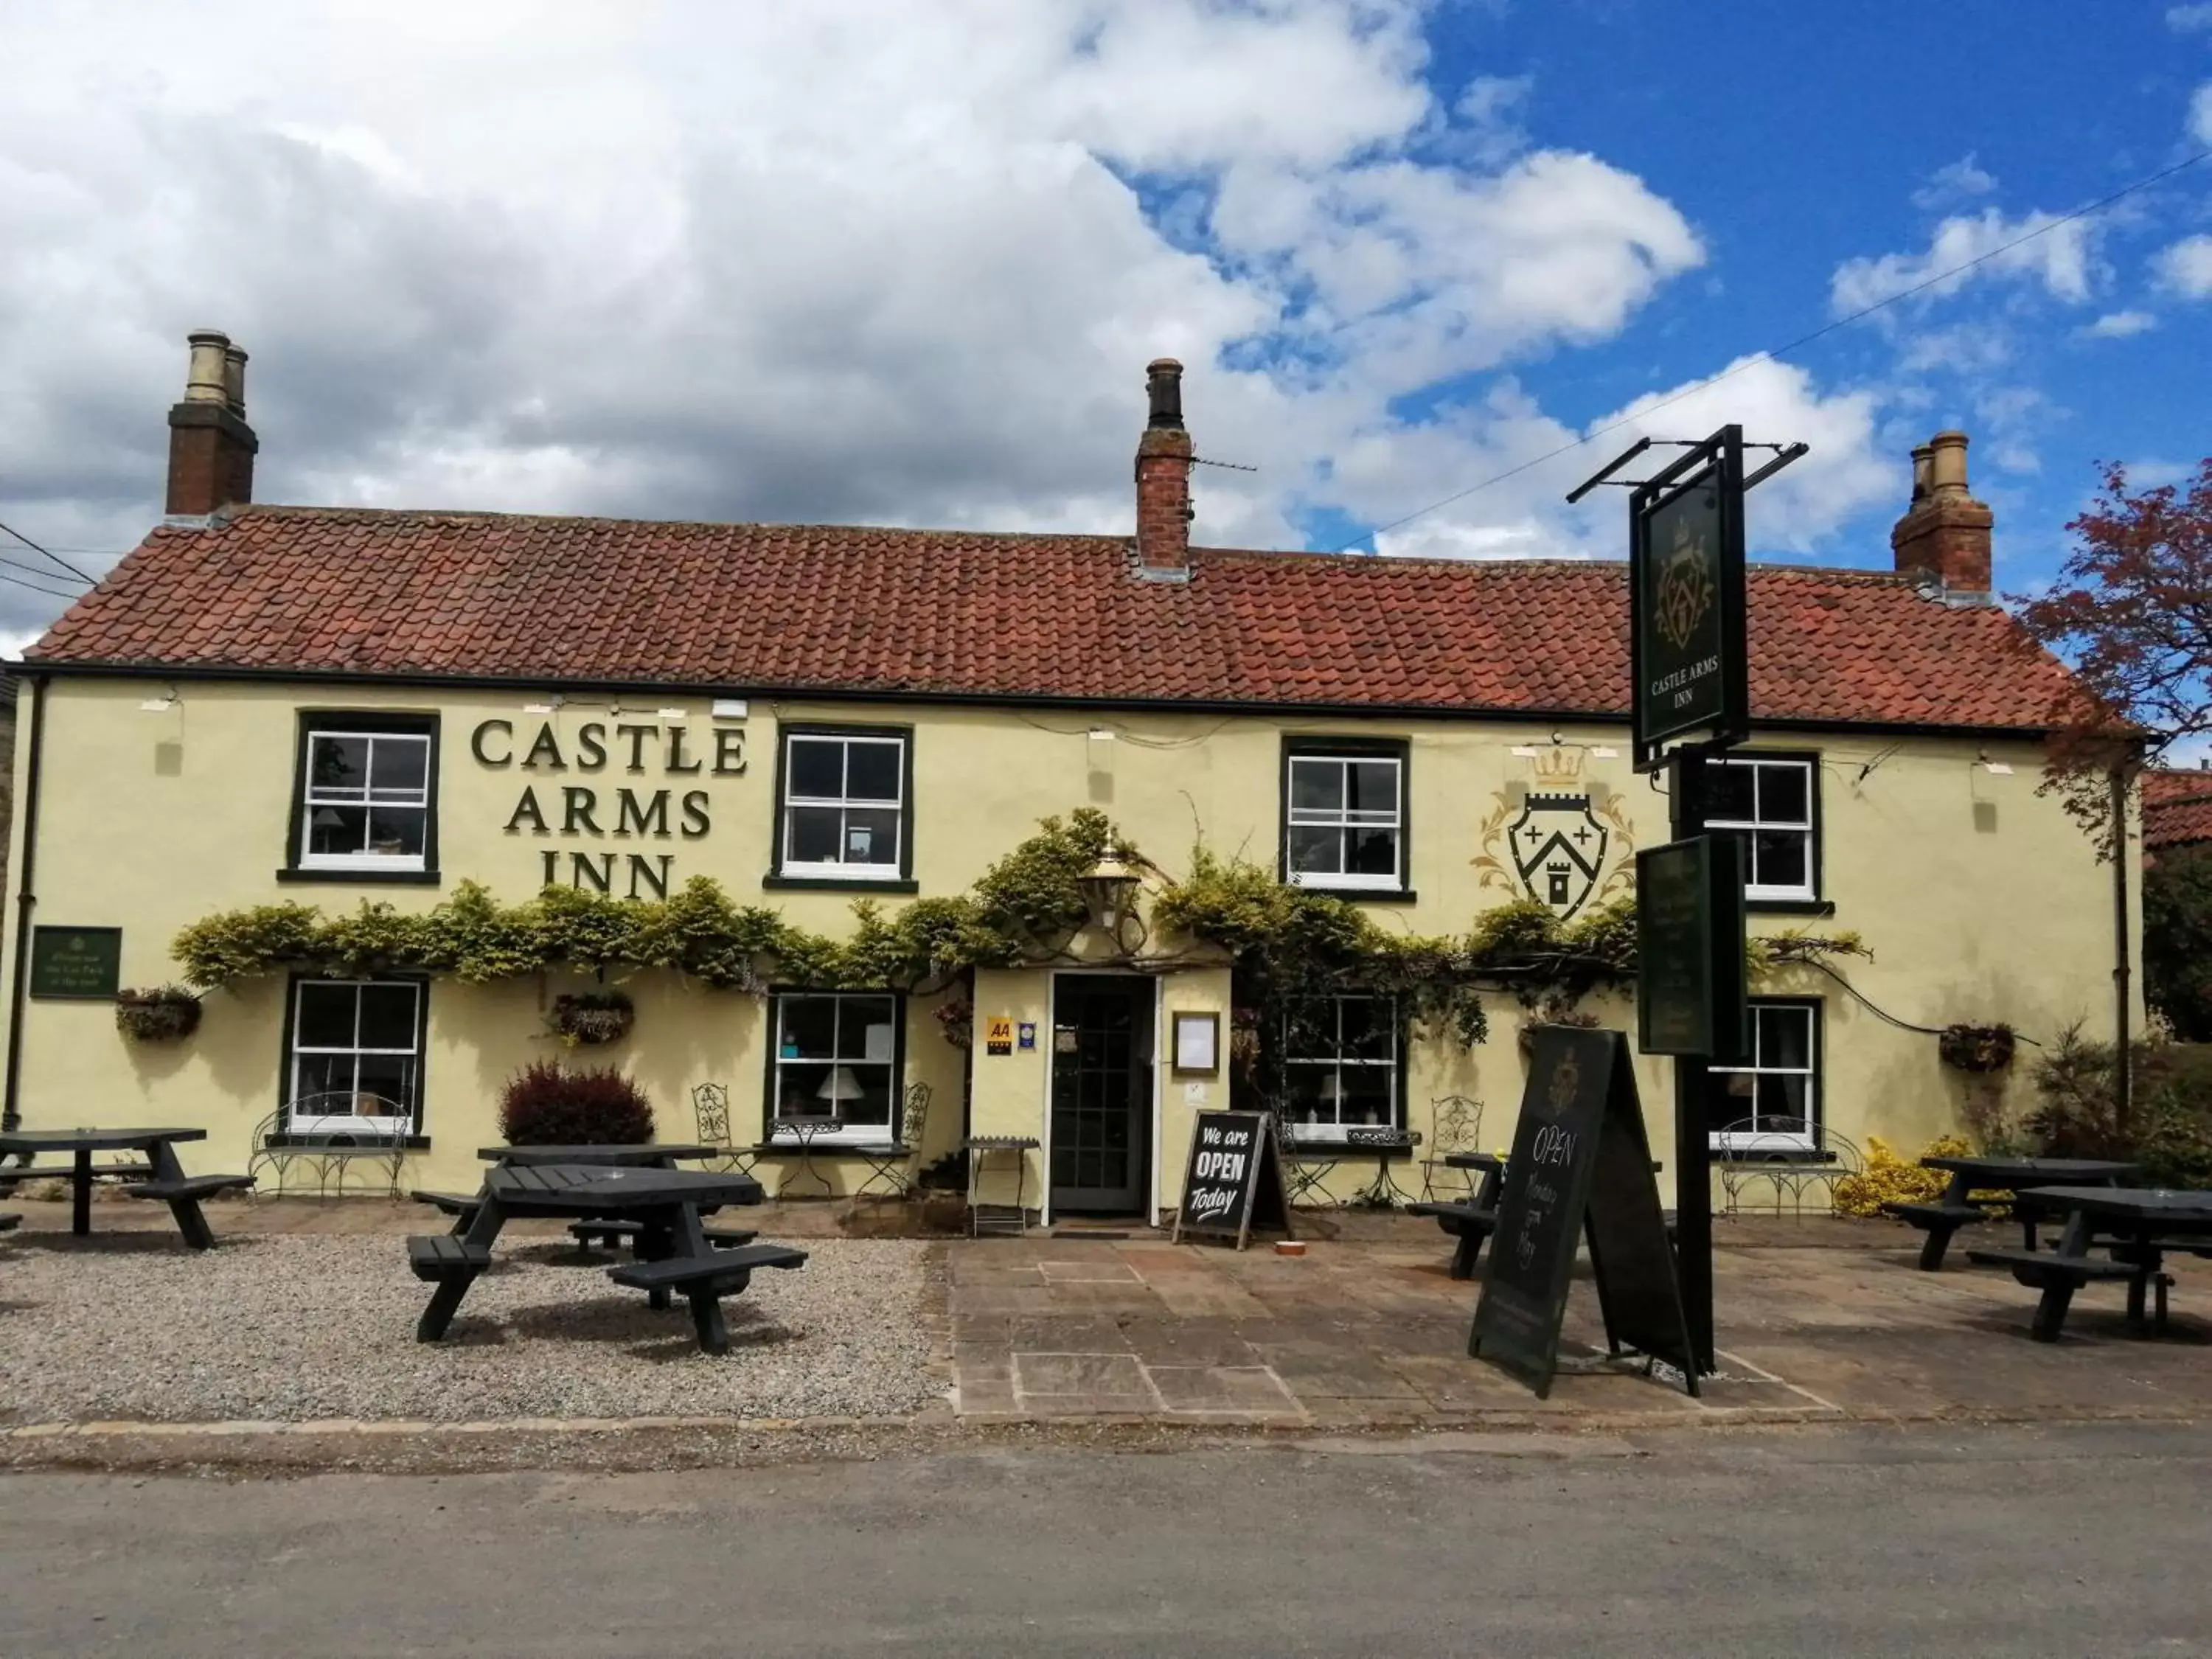 Property building in The Castle Arms Inn